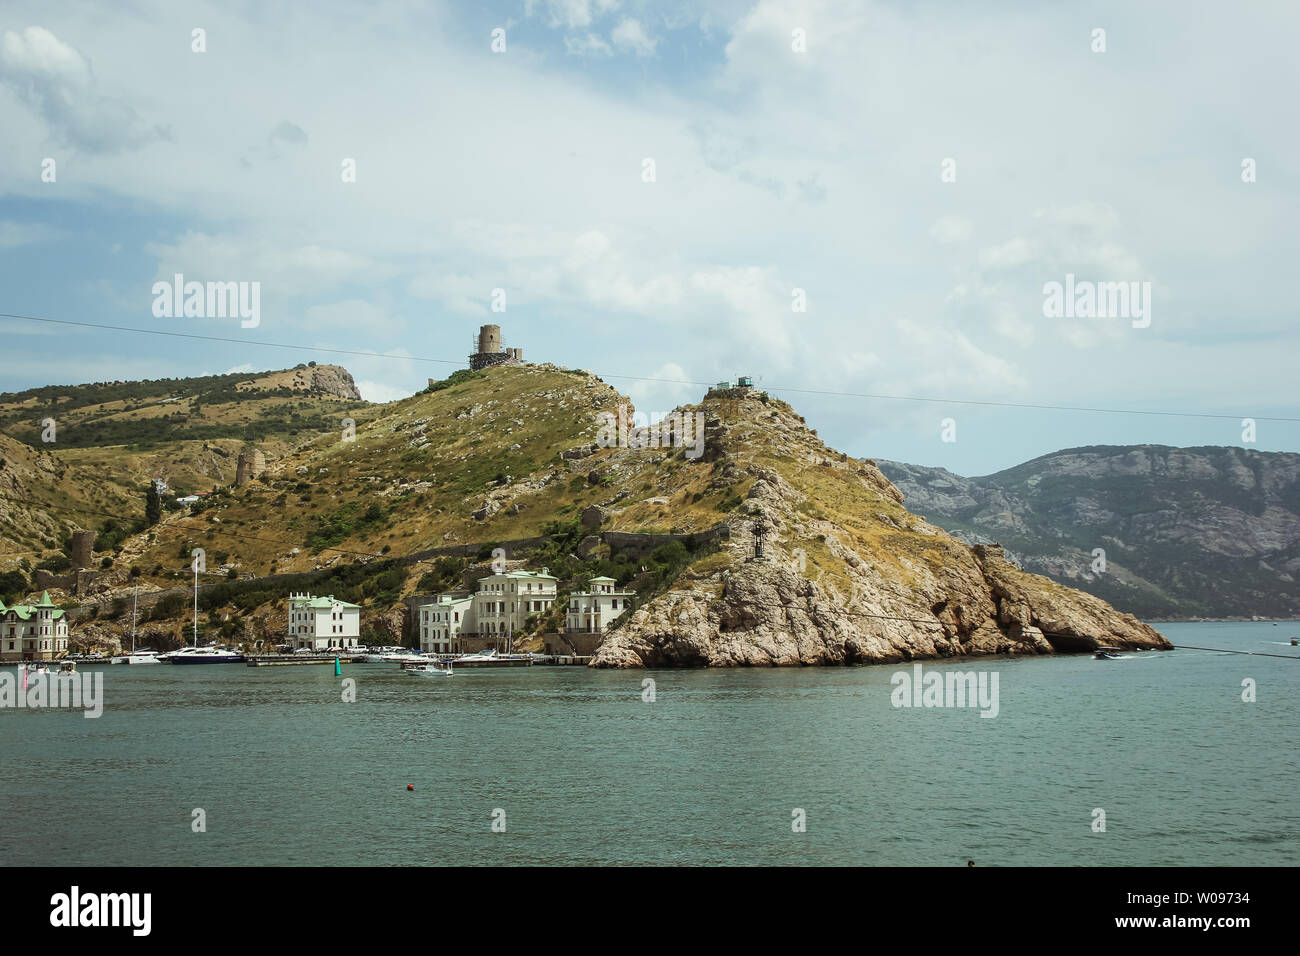 the Bay of Balaklava and the Ruins of Genoese fortress Cembalo. Balaklava, Crimea. beautiful seascape Stock Photo